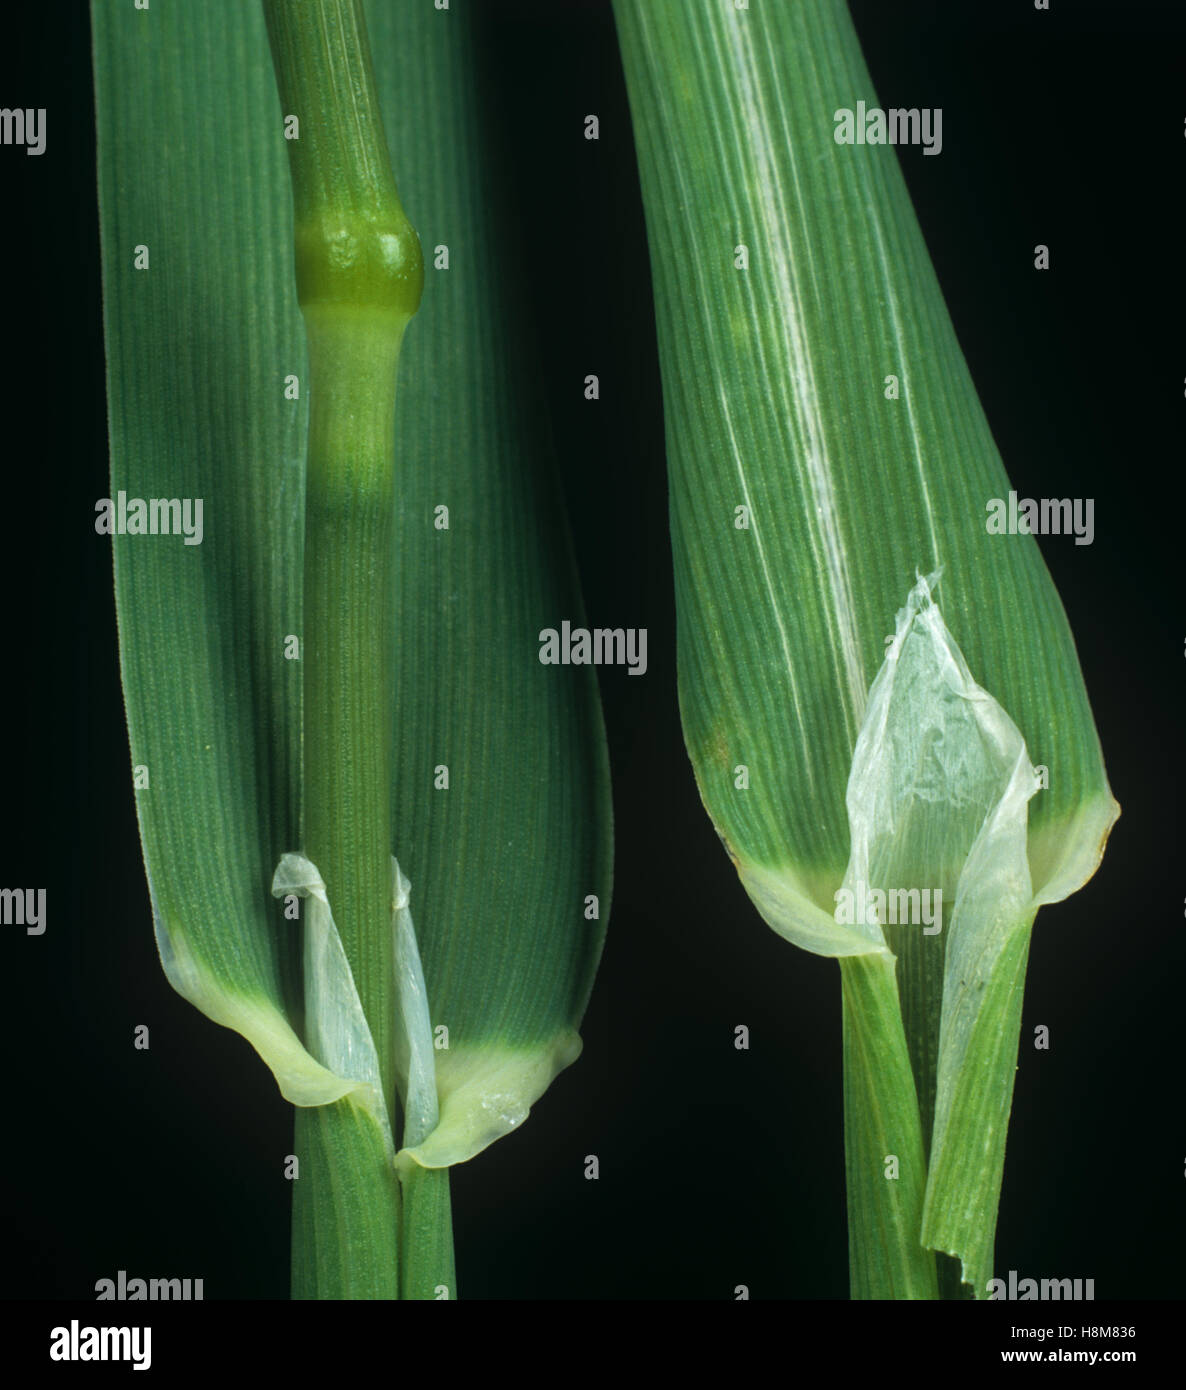 Canary grass, Phalaris canariensis, leaf ligule at the node and leafstalk of an agricultural grass weed Stock Photo